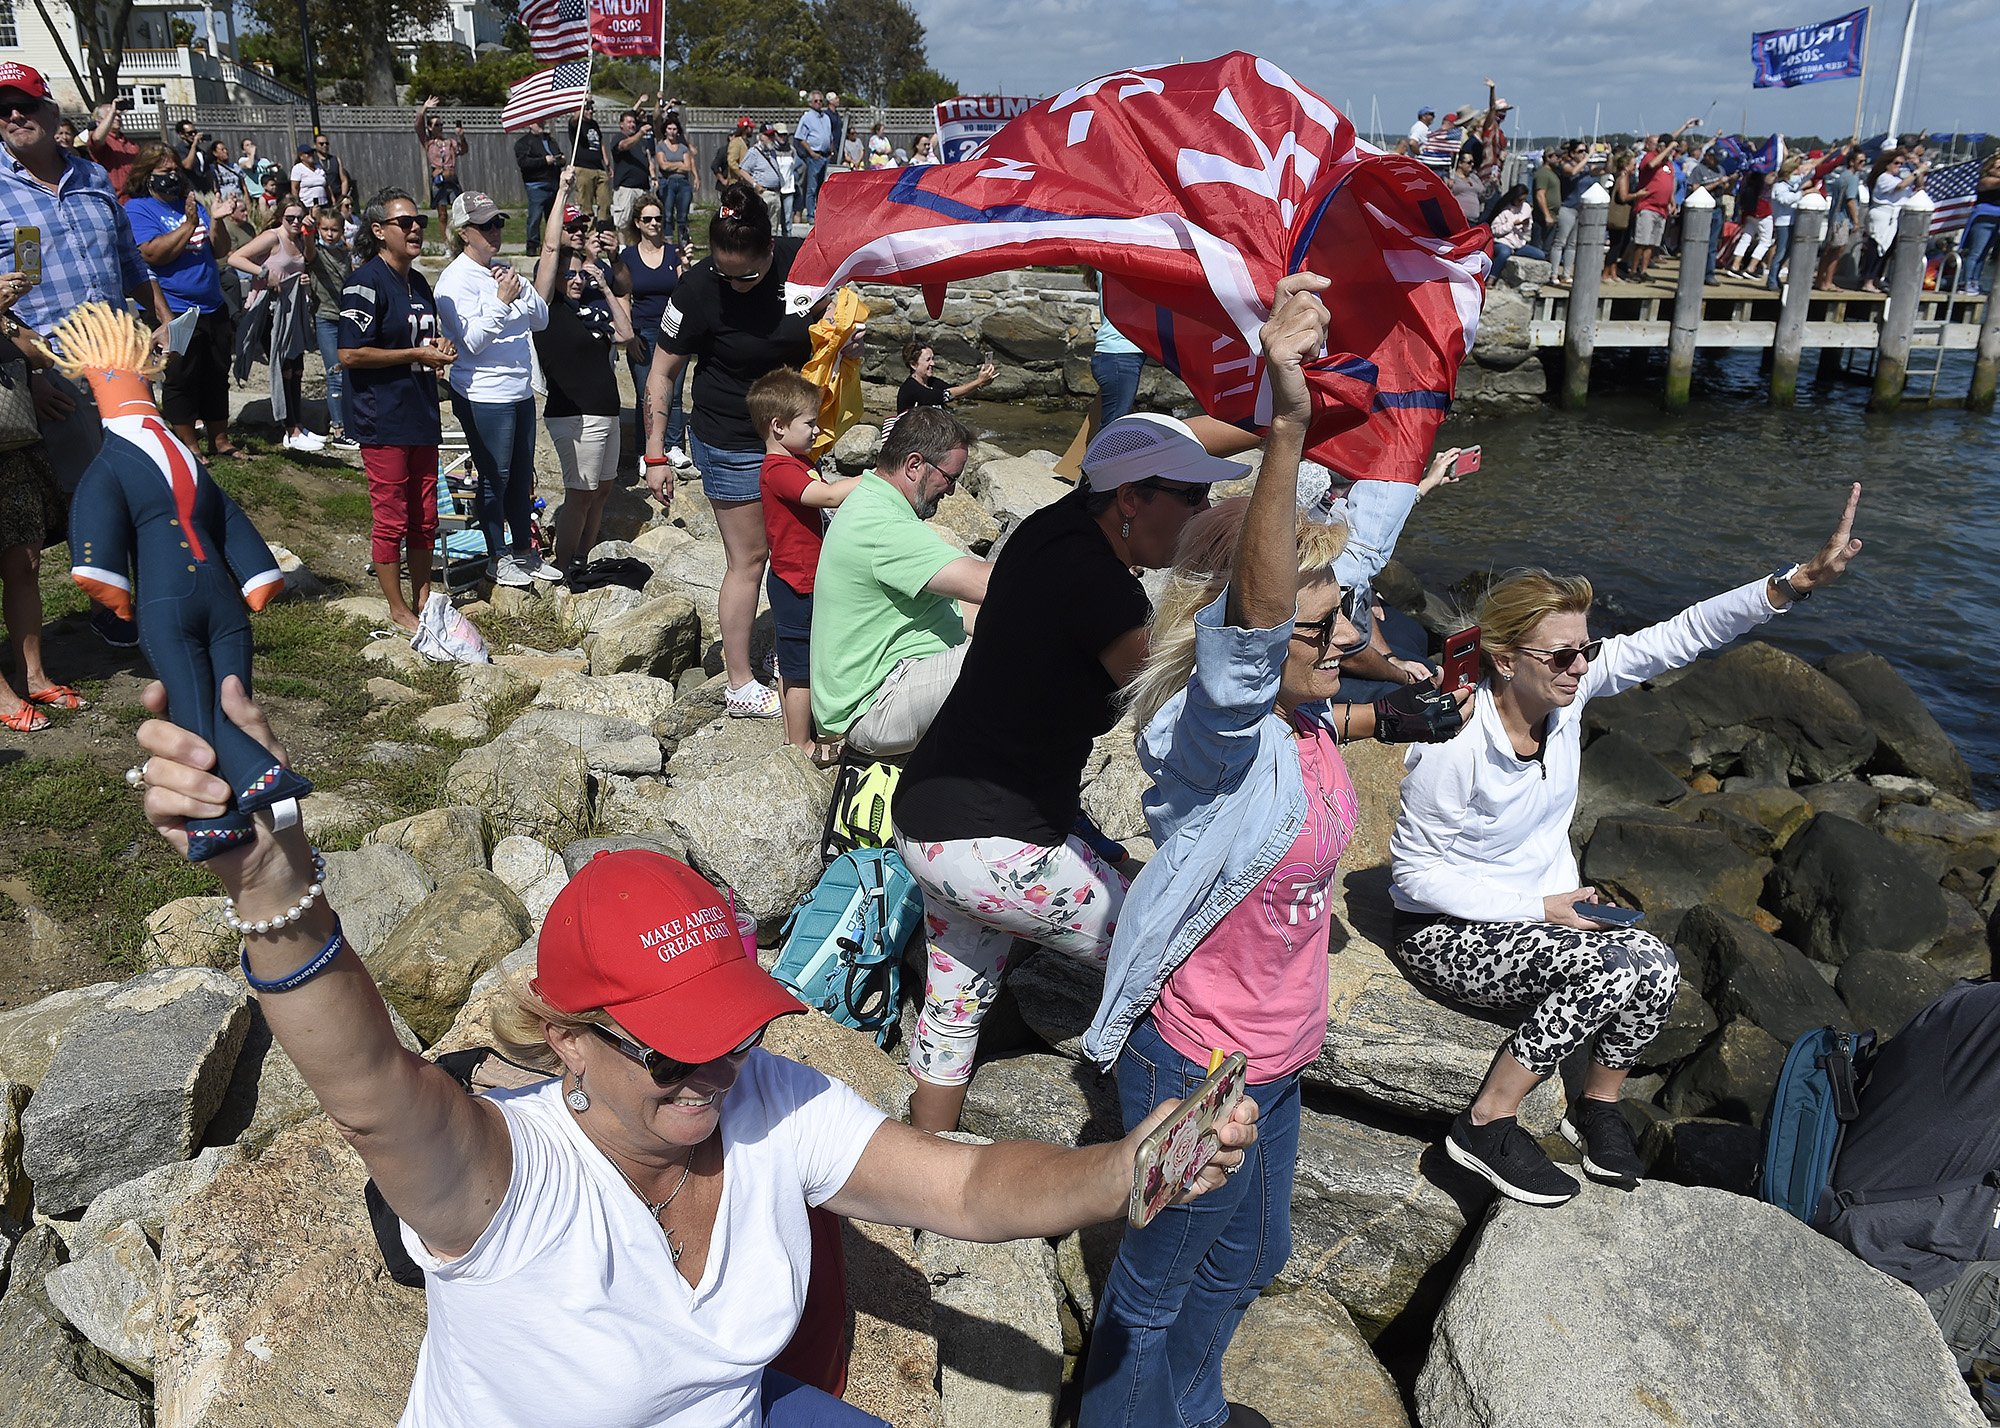  Maureen Lawton, center, of Naragansett, holds up a Donald Trump doll as she cheers during the Trump Boat Floatilla along the Mystic River on Sunday, September 13, 2020. More than 800 boats flying pro-Trump flags and carrying groups of cheering suppo